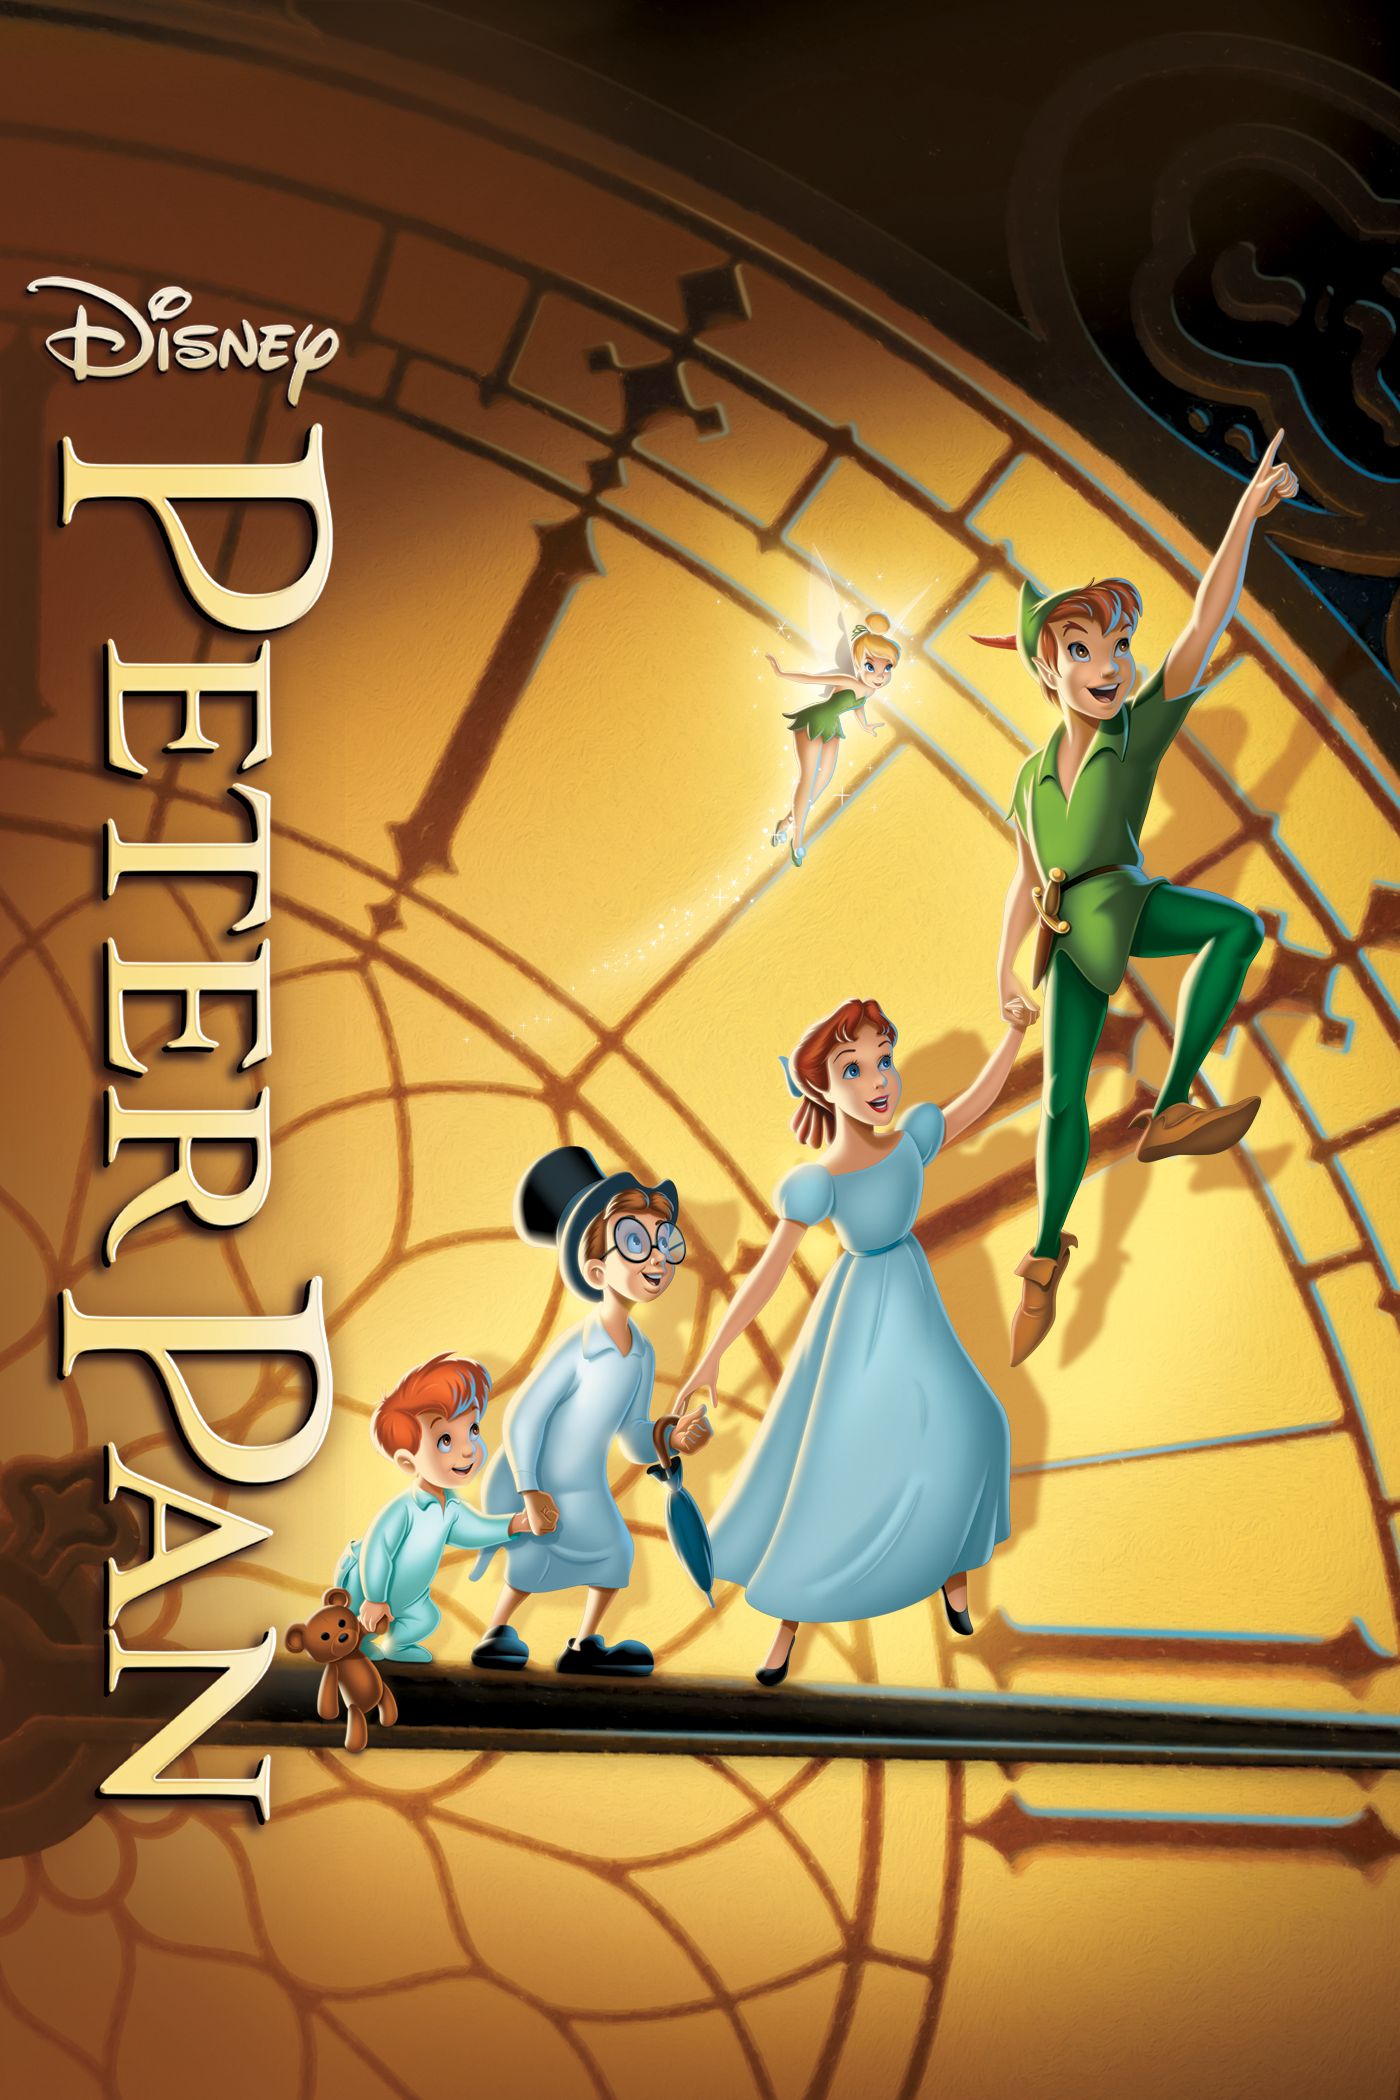 amy nypaver recommends peter pan movie download pic